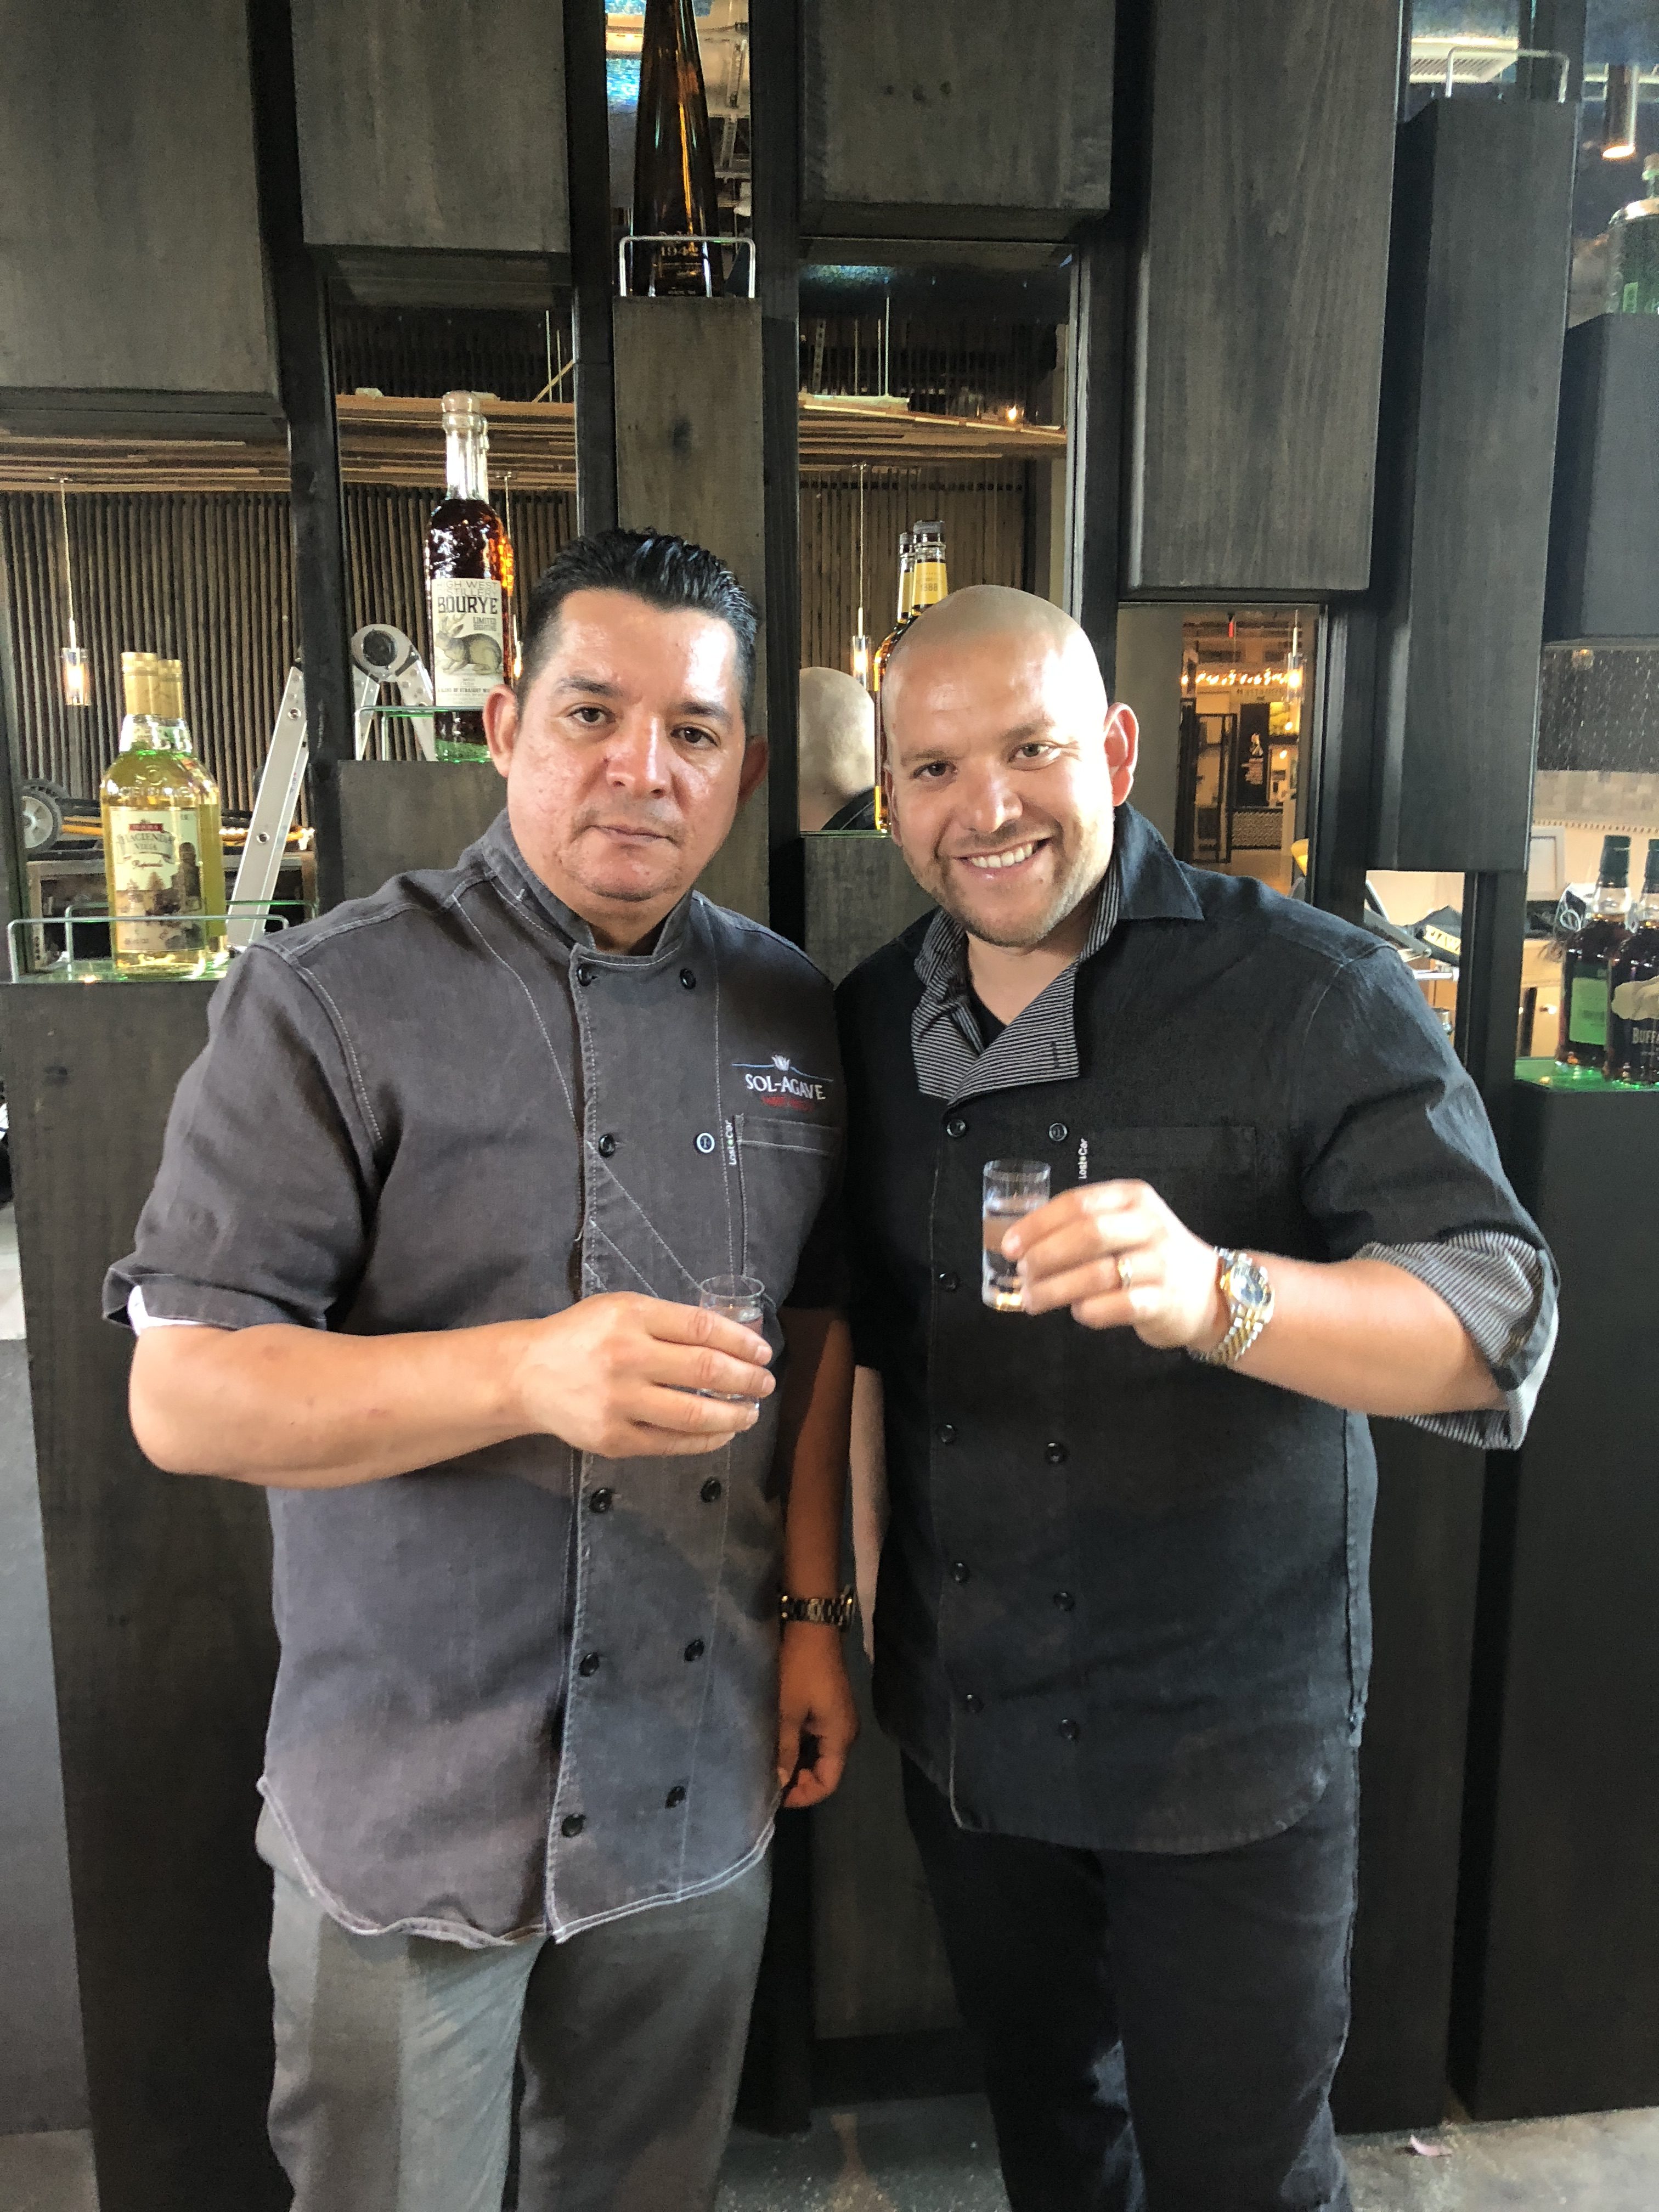 Business partners Velasco and Galvez of the upcoming Sol Agave in Mission Viejo